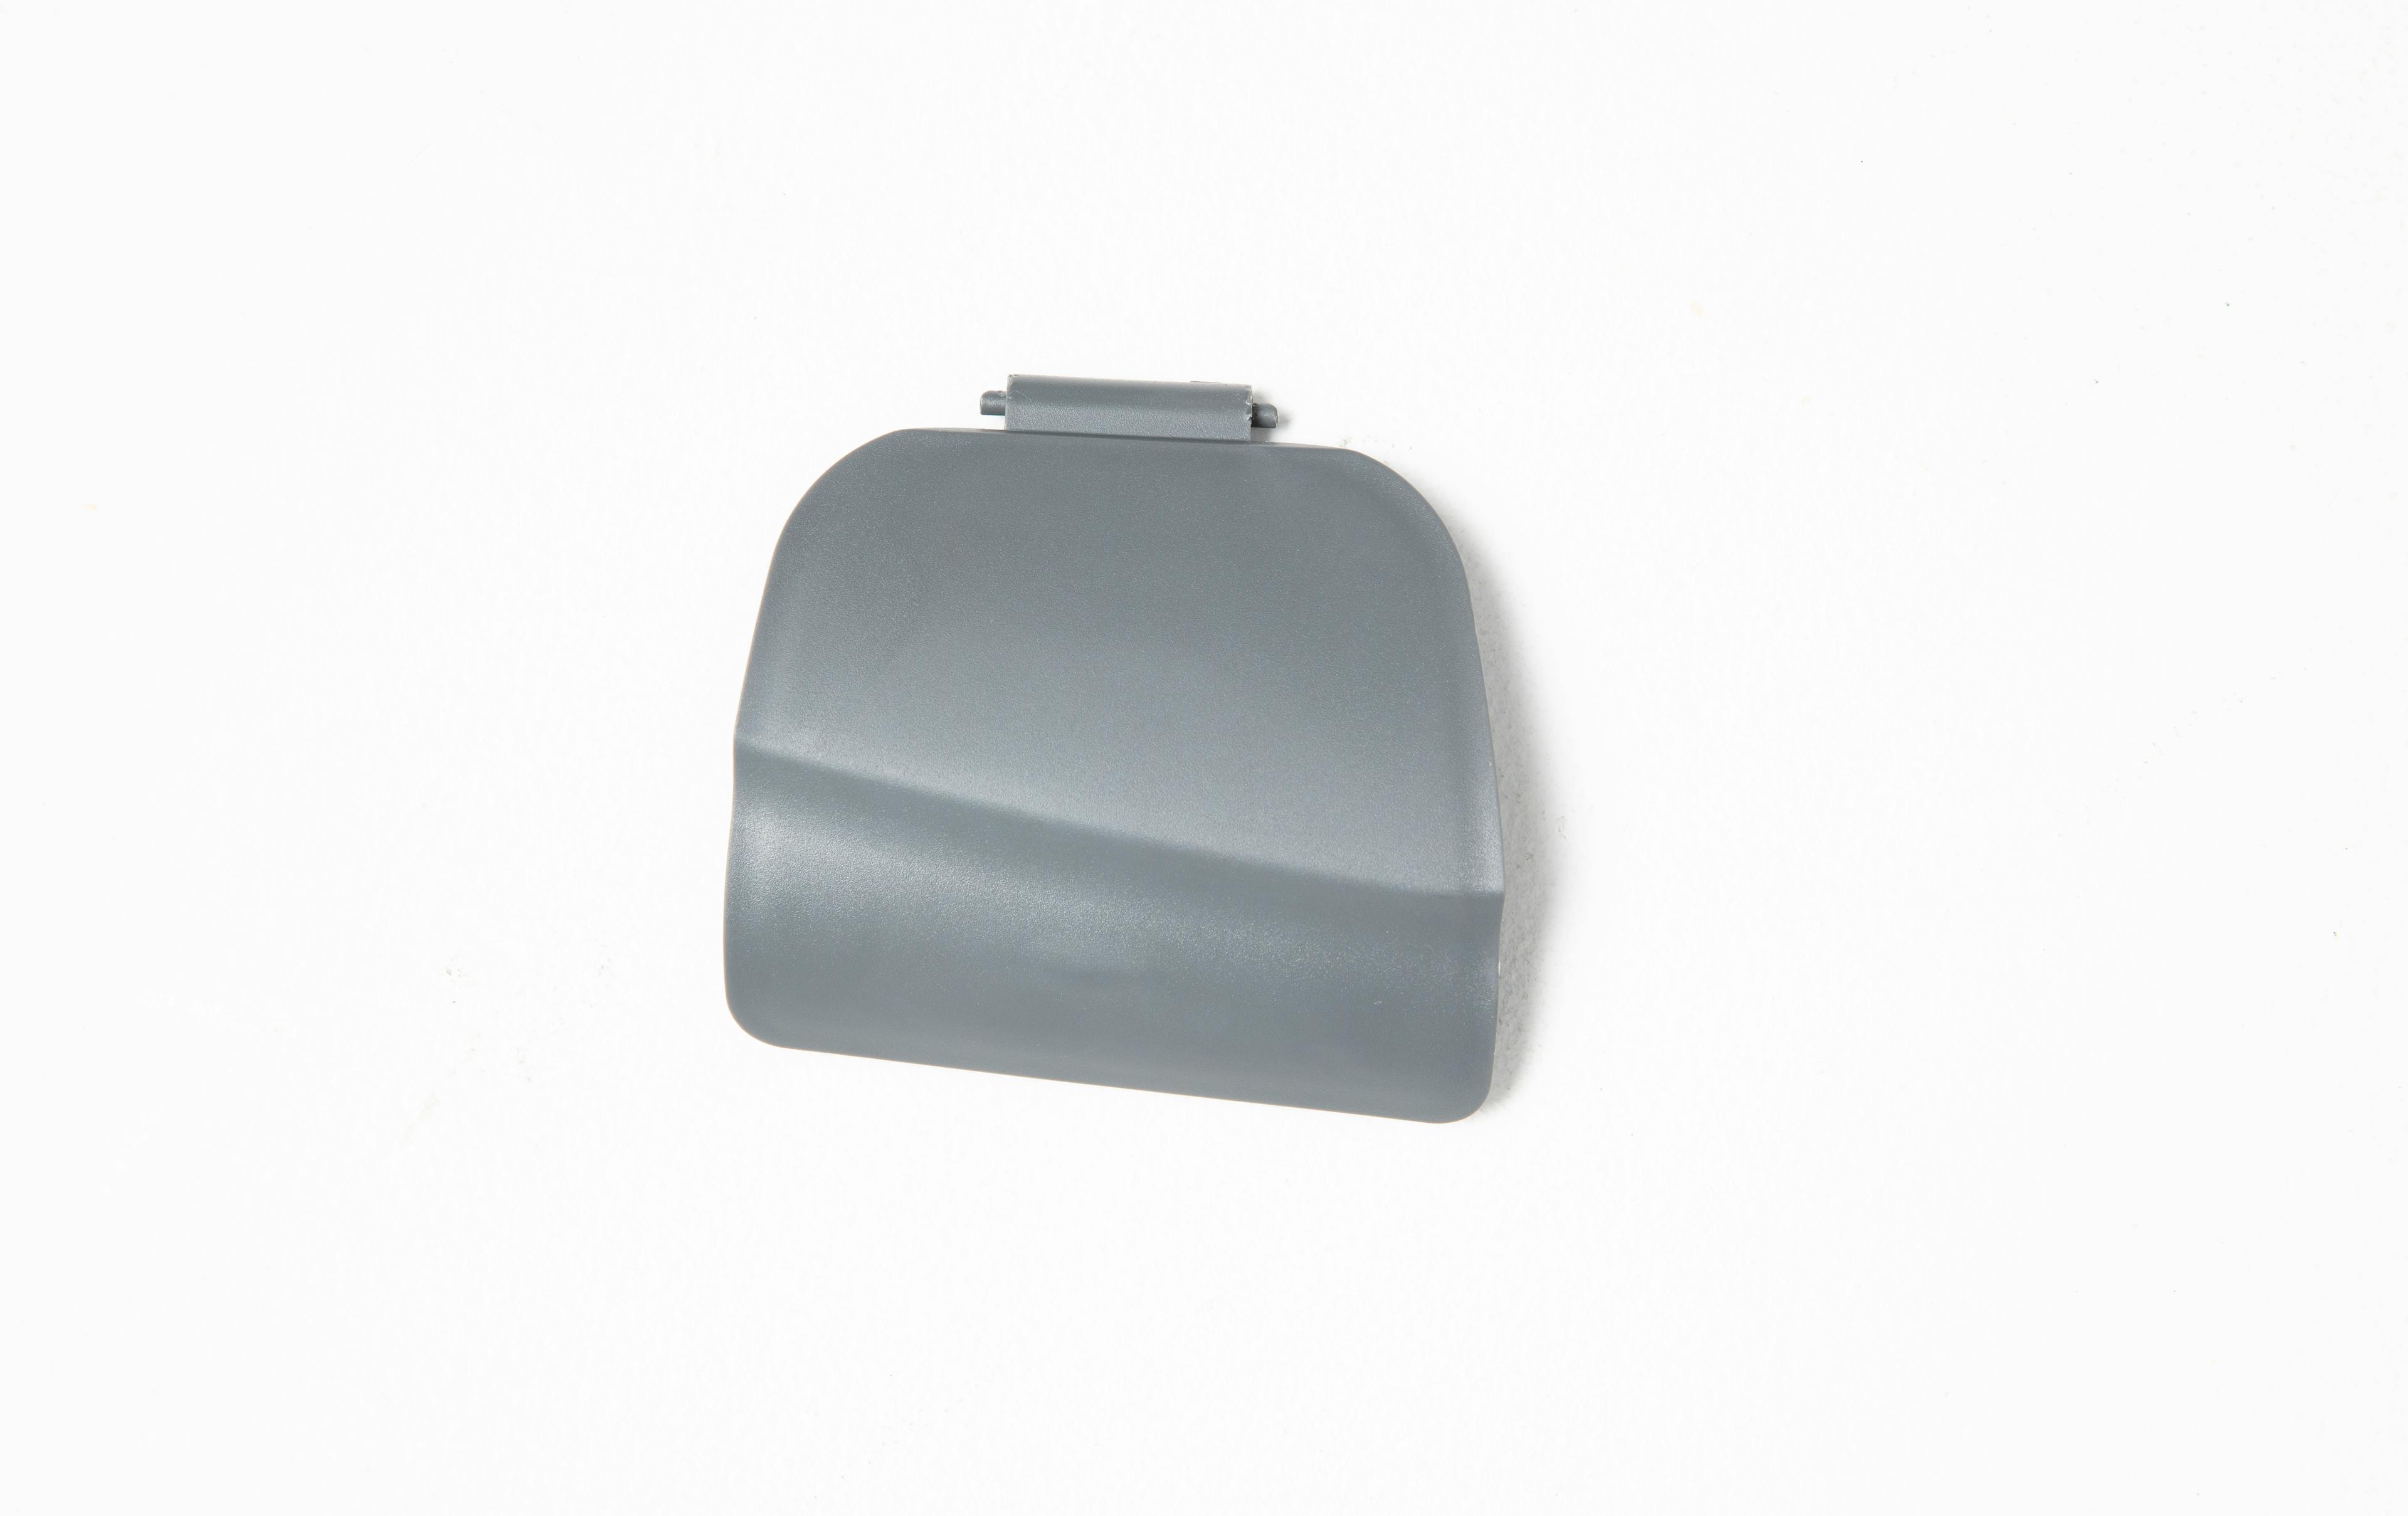 Valve Housing Cover for Comfort Jet Console